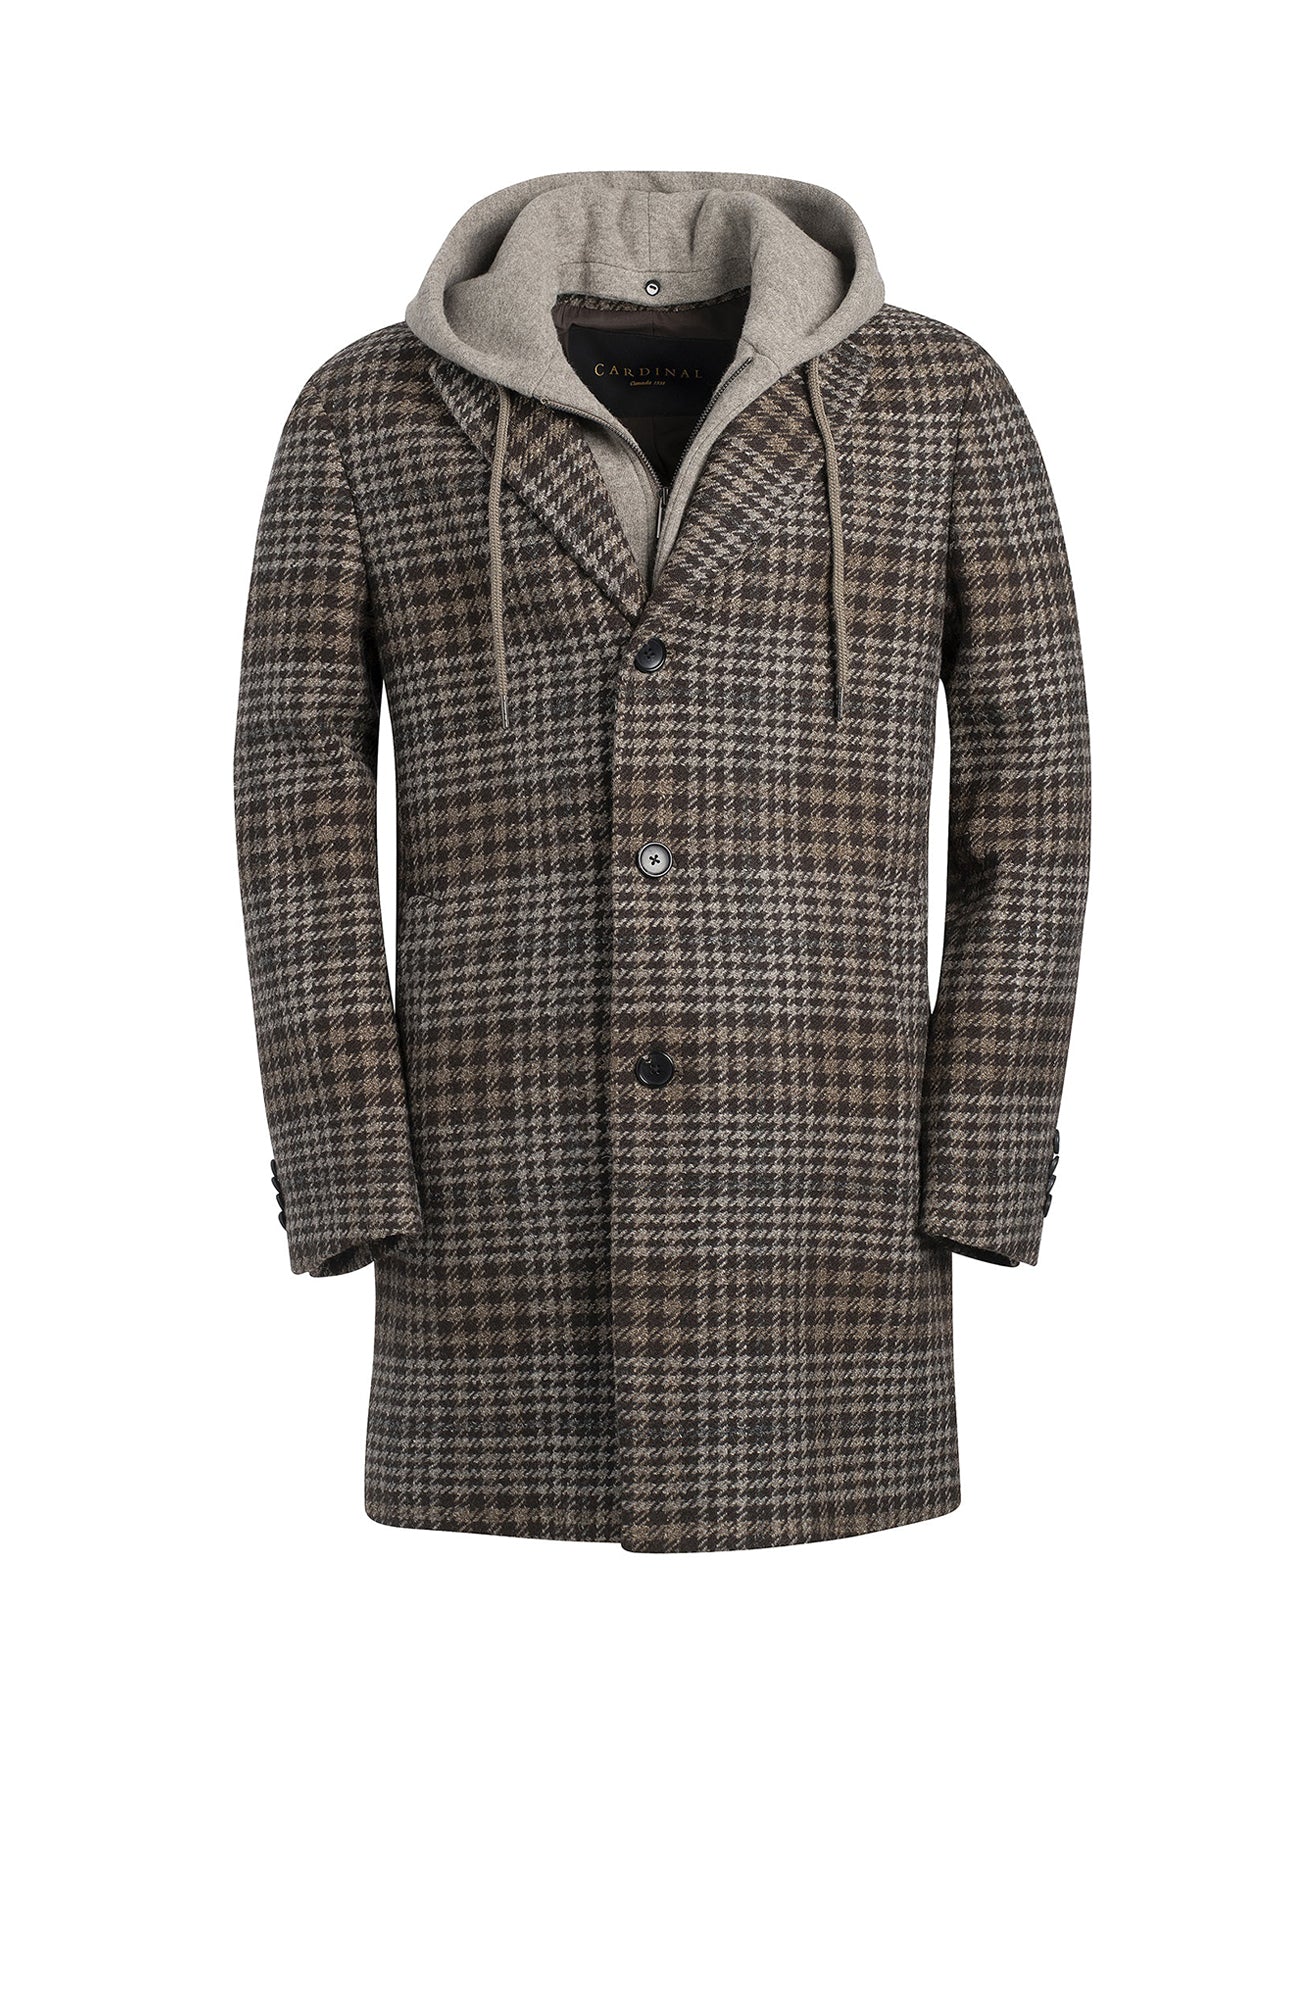 Tristen brown taupe houndstooth wool top coat 36 inch length